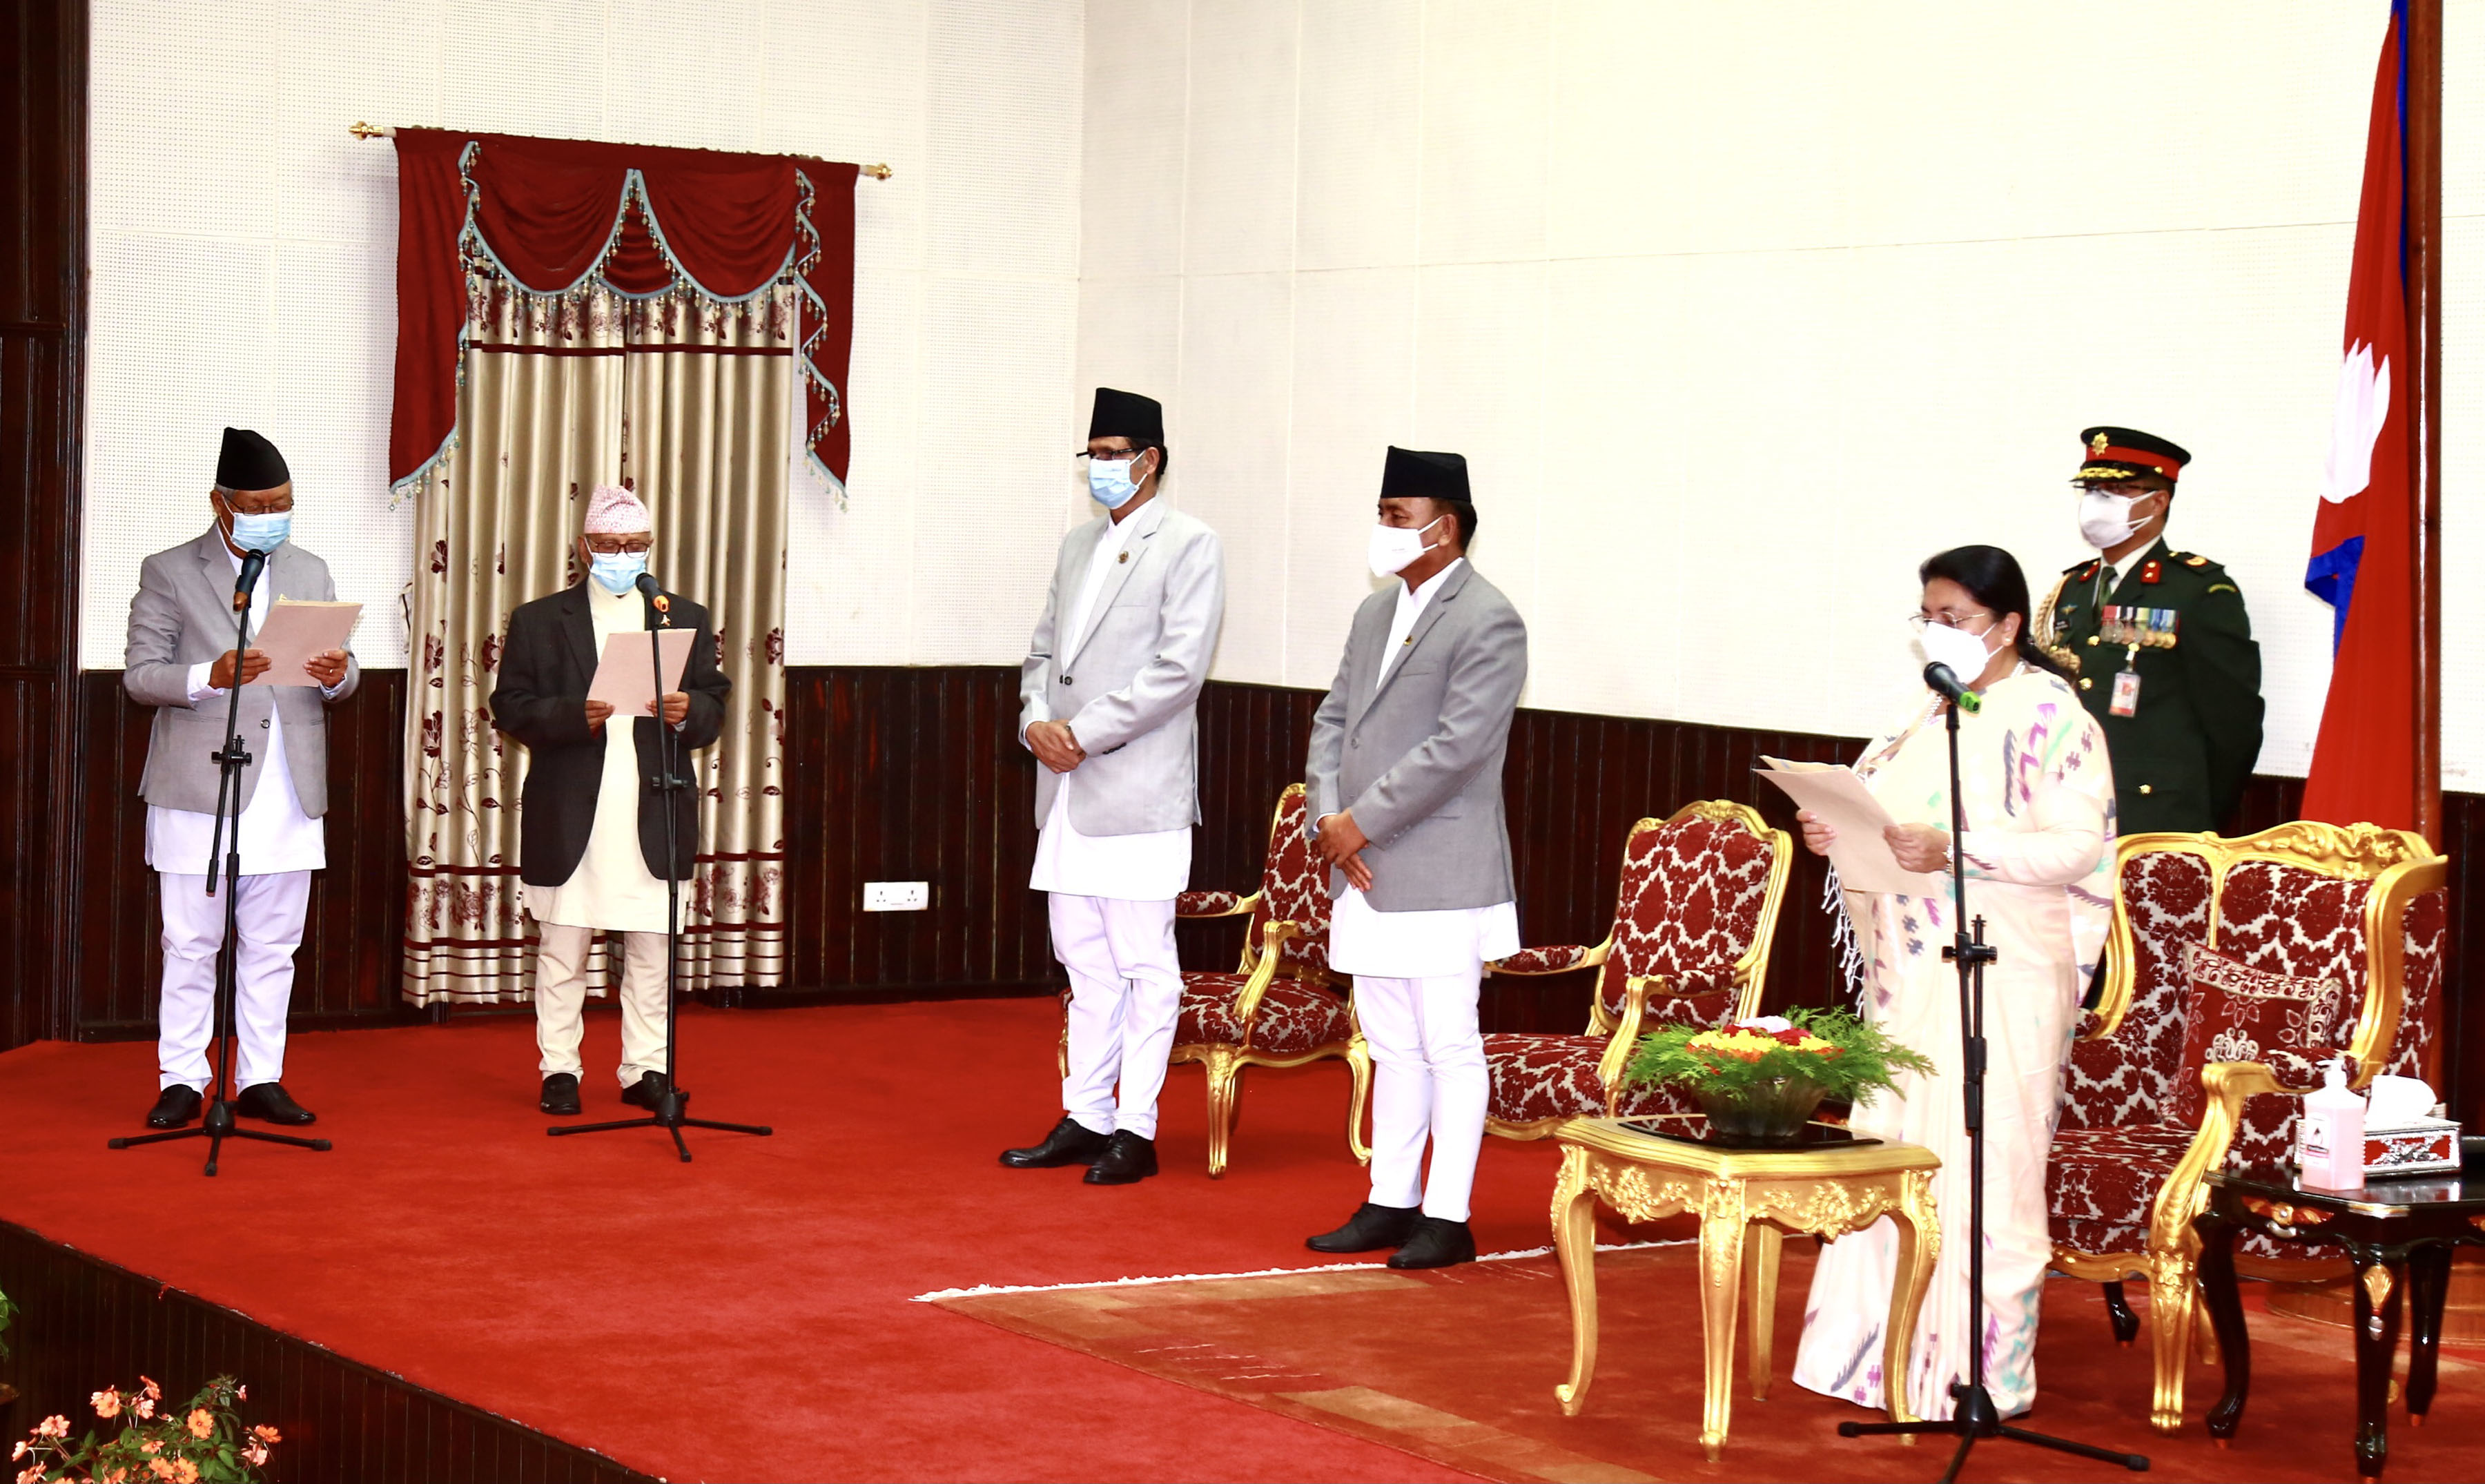 prez-bhandari-administers-oath-of-office-secrecy-to-newly-appointed-province-chiefs